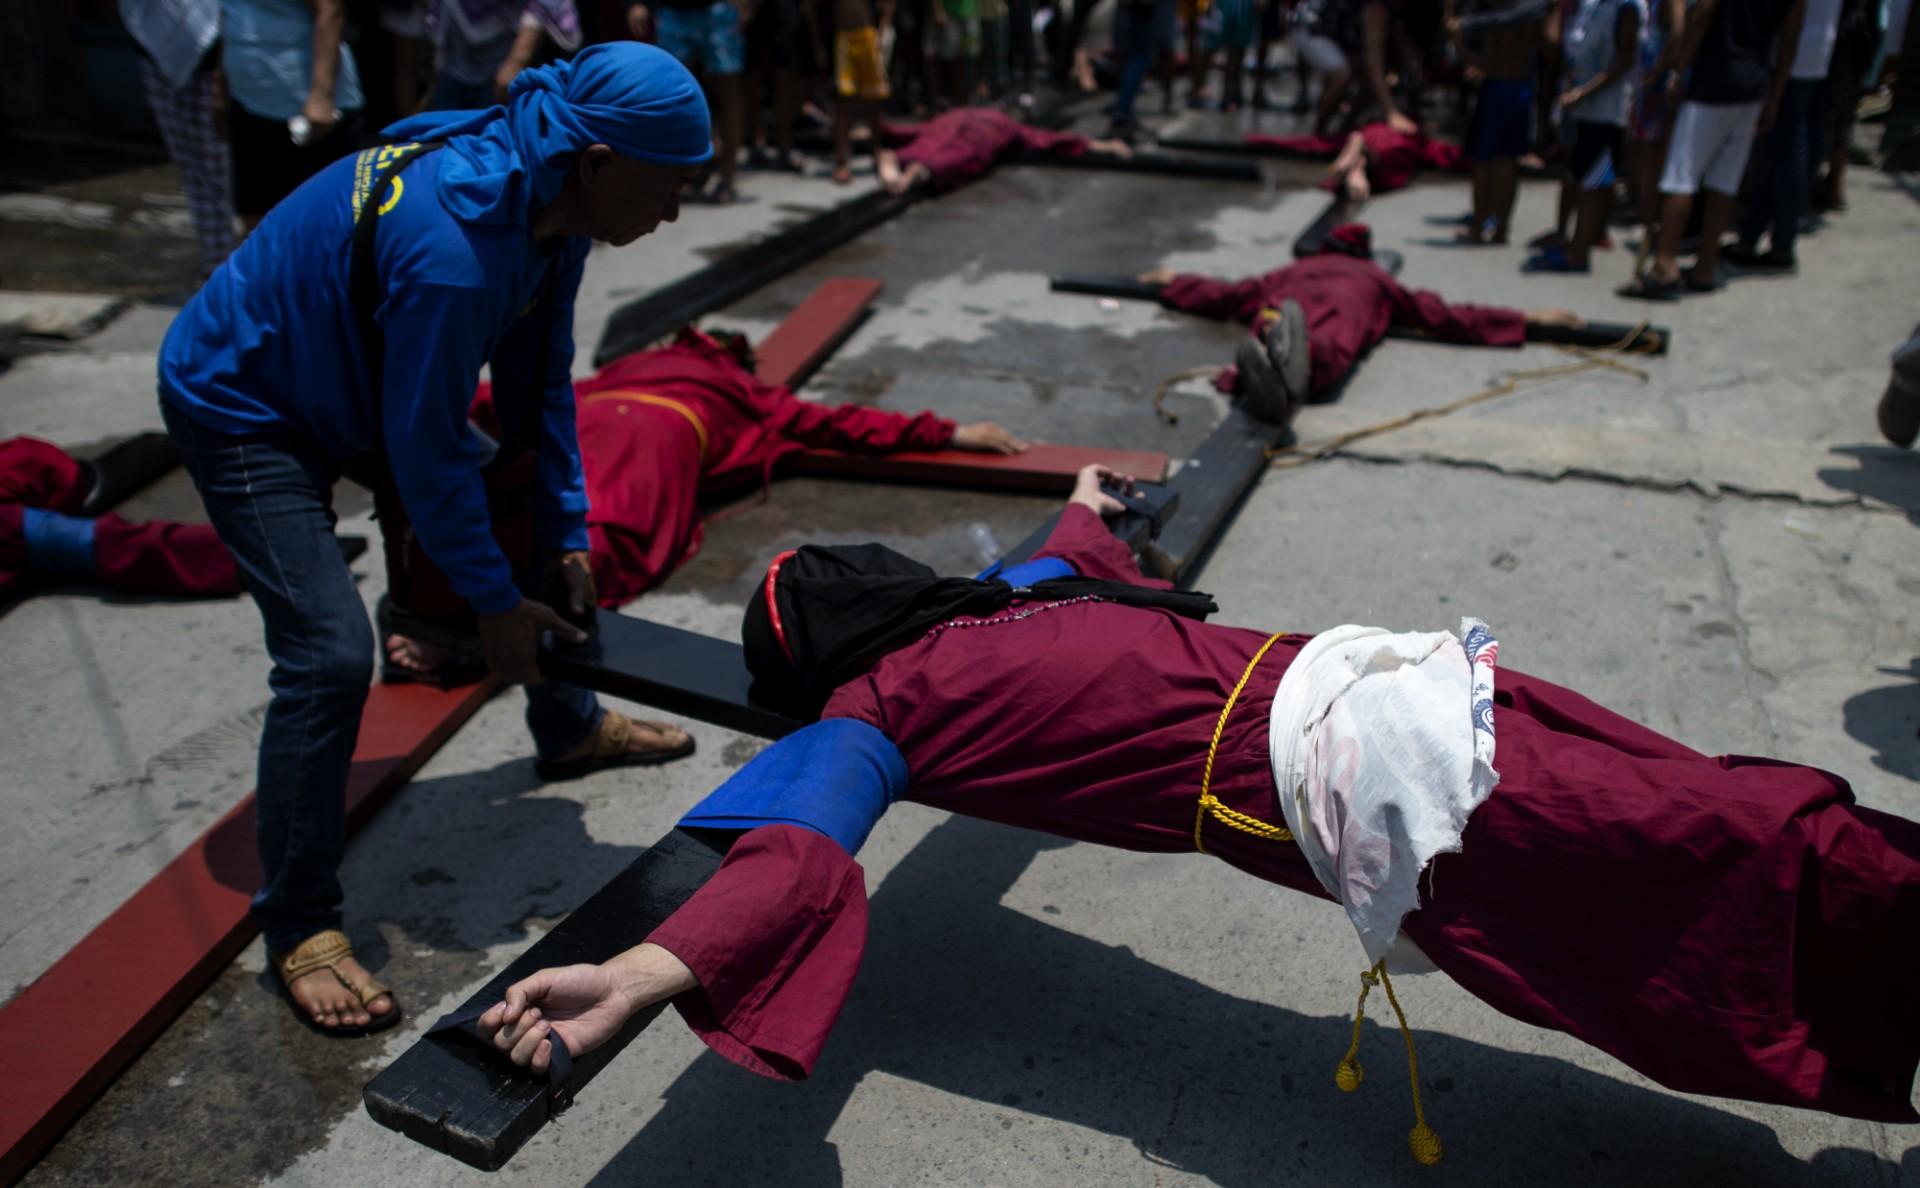 Men lie on crosses on a street in Mabalacat, Pampanga on April 18, 2019, one day ahead of the reenactment of the crucifixion of Jesus Christ on Good Friday. Photo: AFP